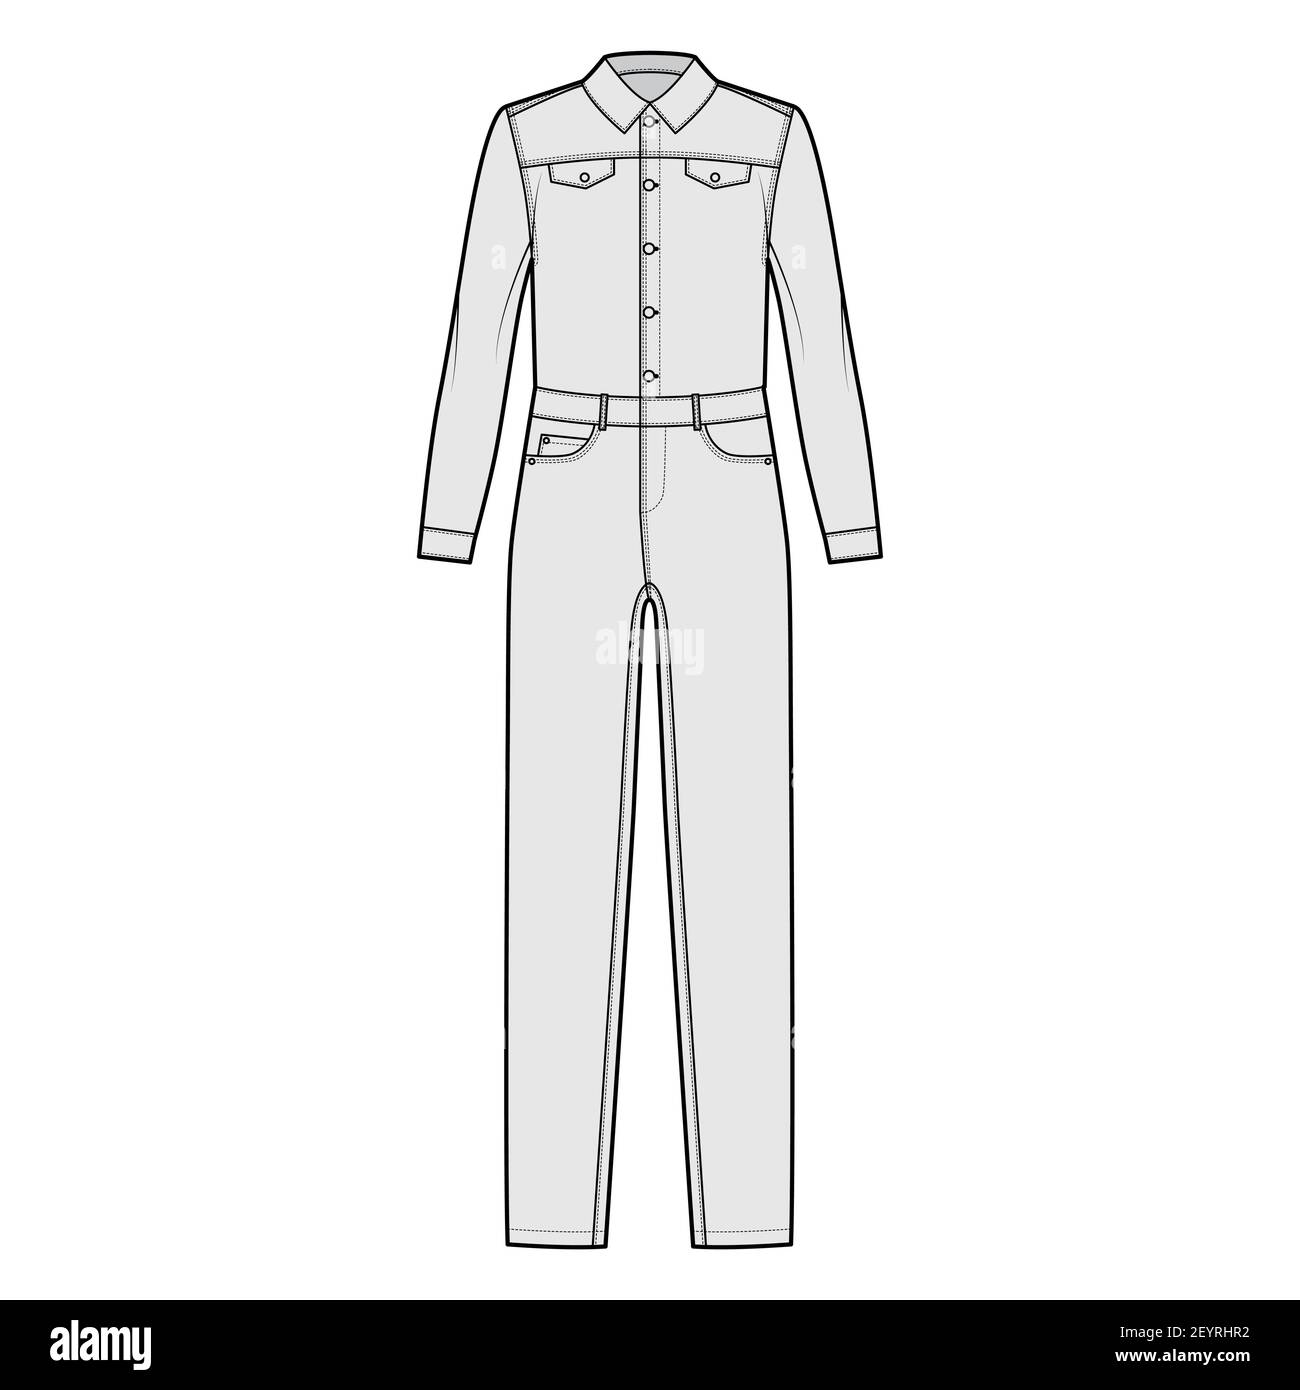 Denim overall jumpsuit Dungaree technical fashion illustration with full  length, button closure, long sleeves, normal waist, high rise. Flat front,  white grey color style. Women, men unisex CAD mockup Stock Vector Image